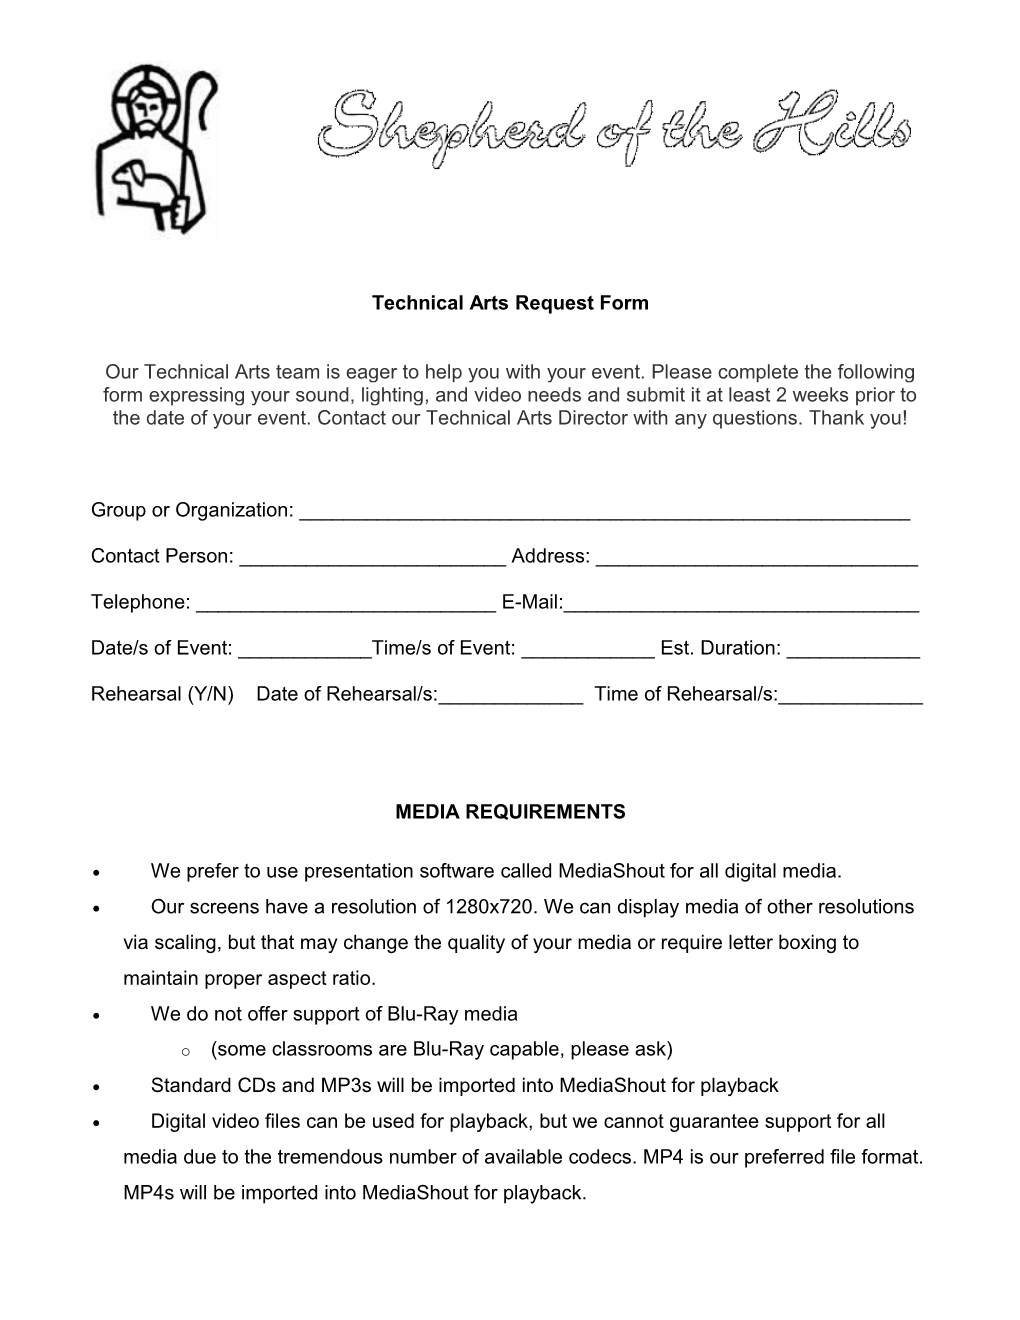 Request Form for Use of Third Reformed Church Facilities